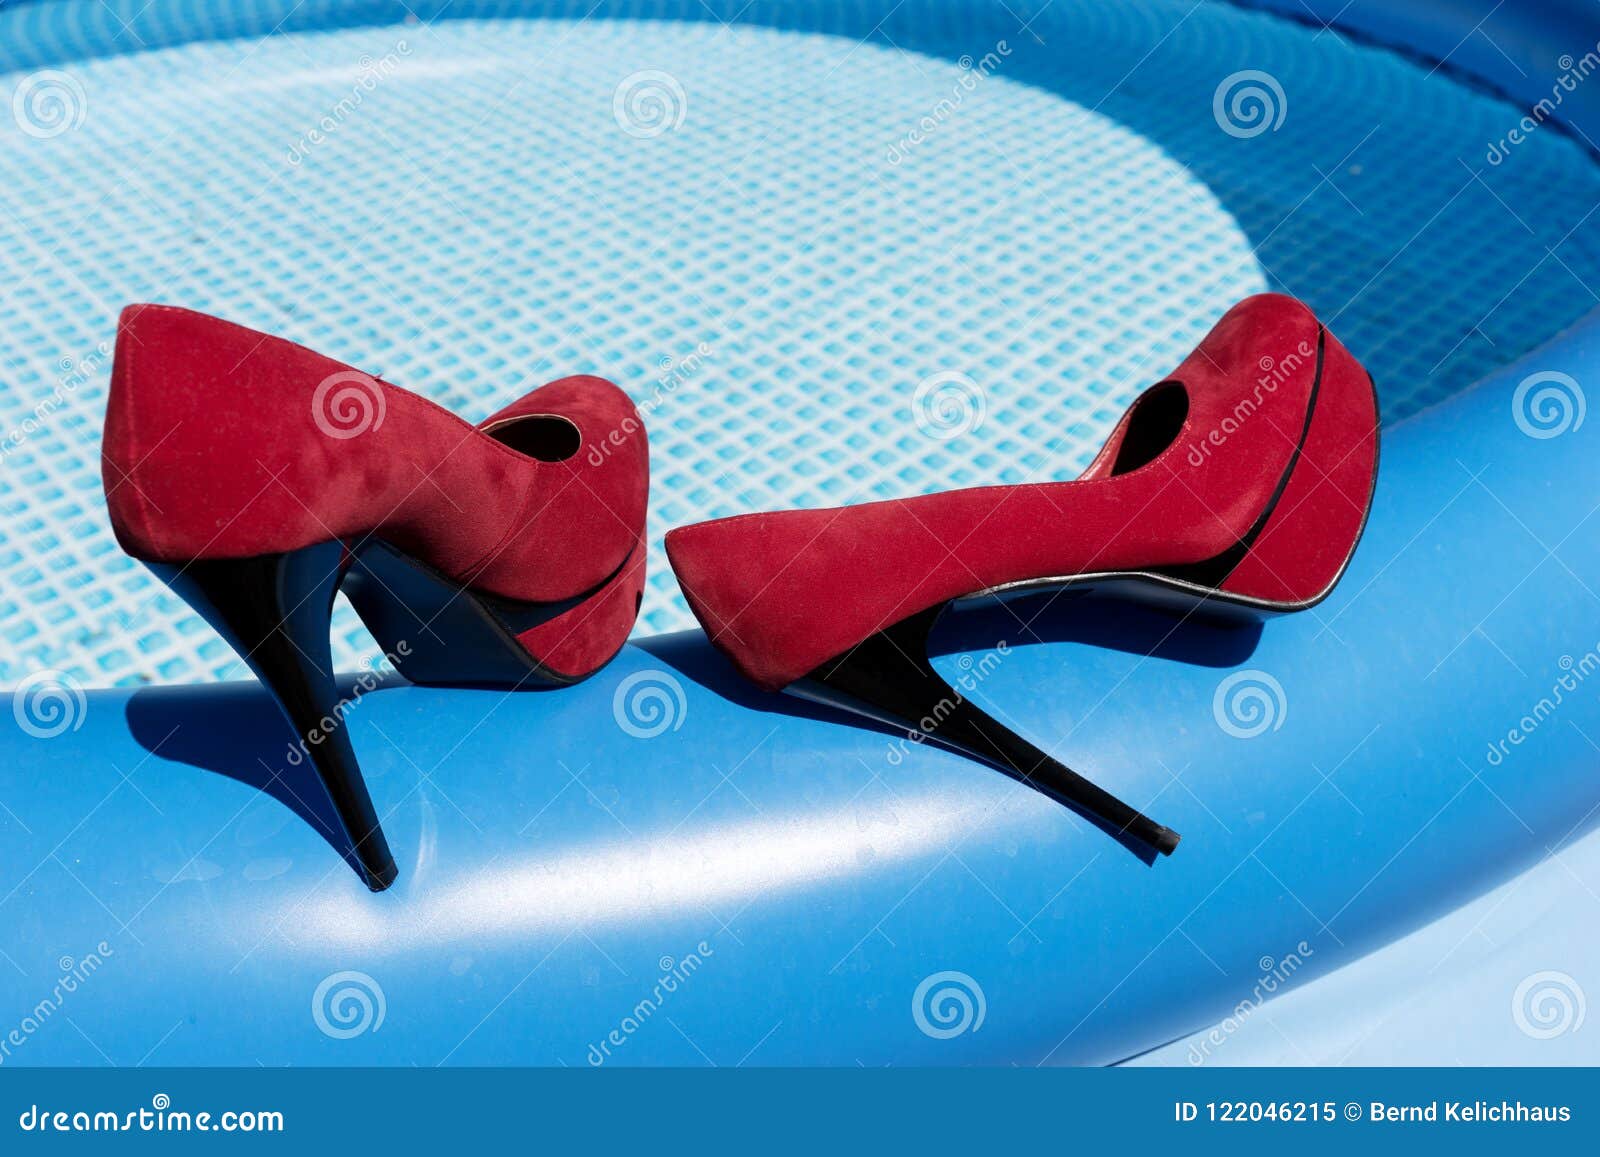 Red High Heels on the Edge of the Swimming Pool Stock Image - Image of ...